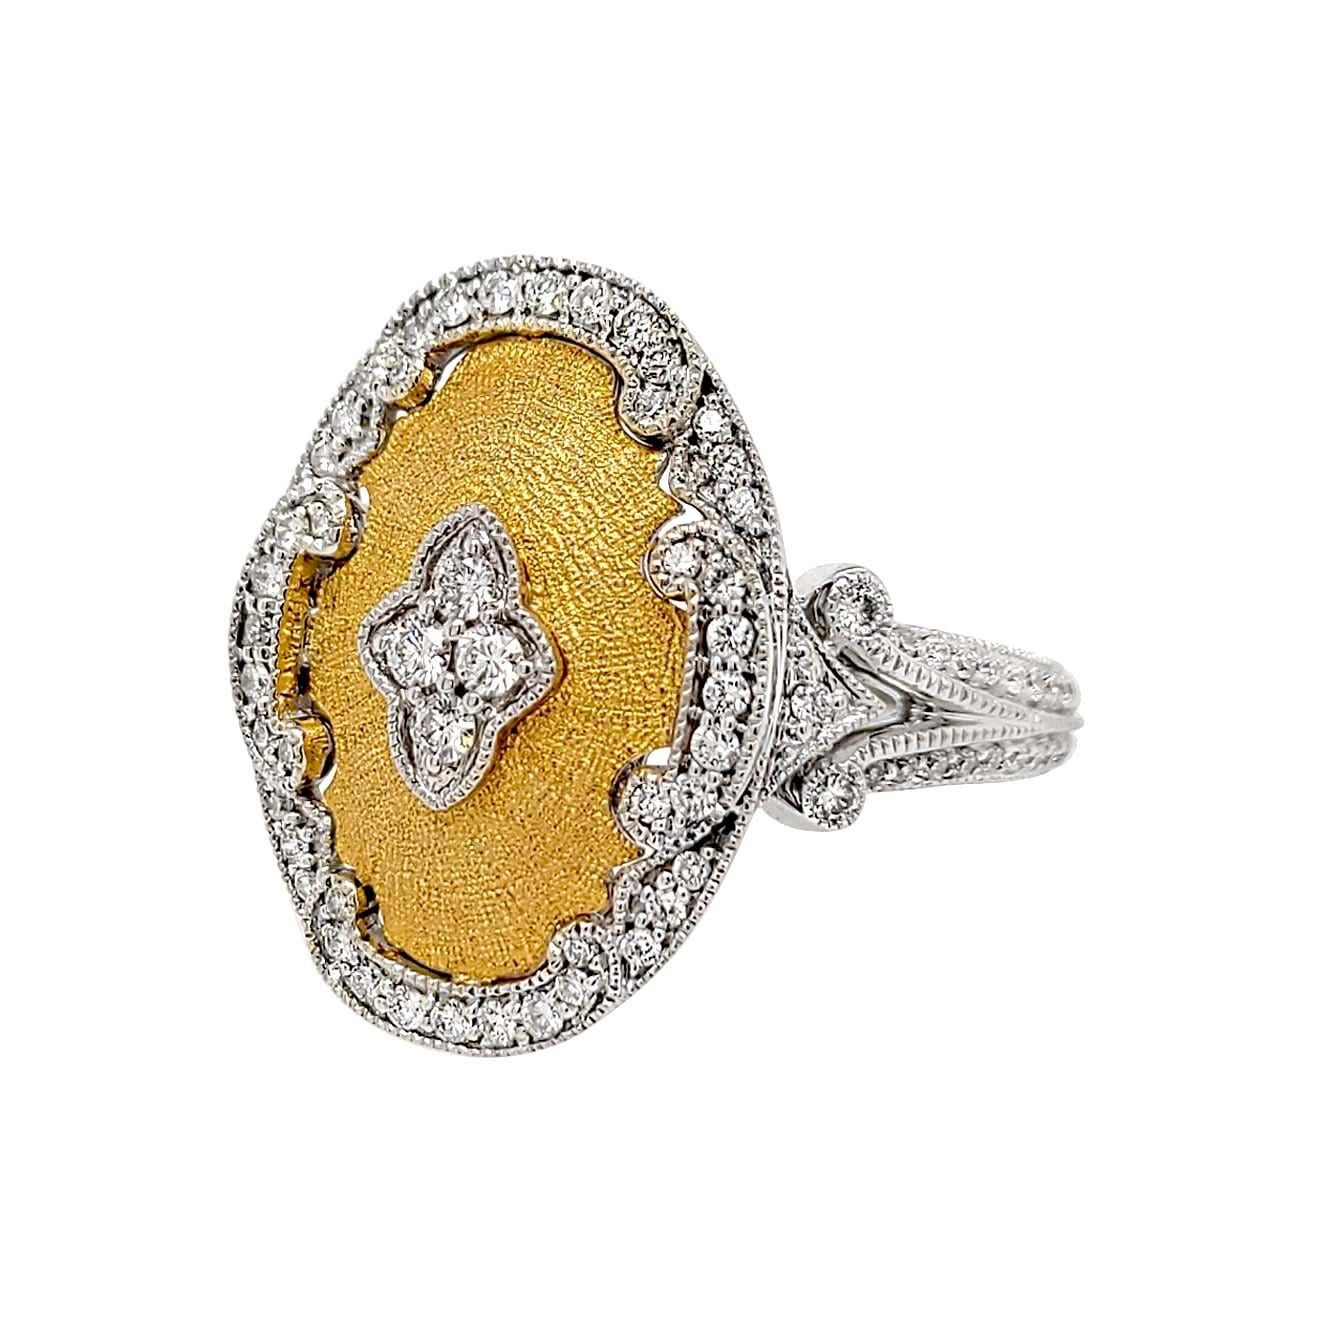 Produced by award winning Italian designer Stefano Vitolo. Stefano creates custom artisanal one of a kind jewelry with excellent gemstones in a truly old world Italian craftmanship.
This handcrafted ring has 0.64 total carat weight of F/G color and